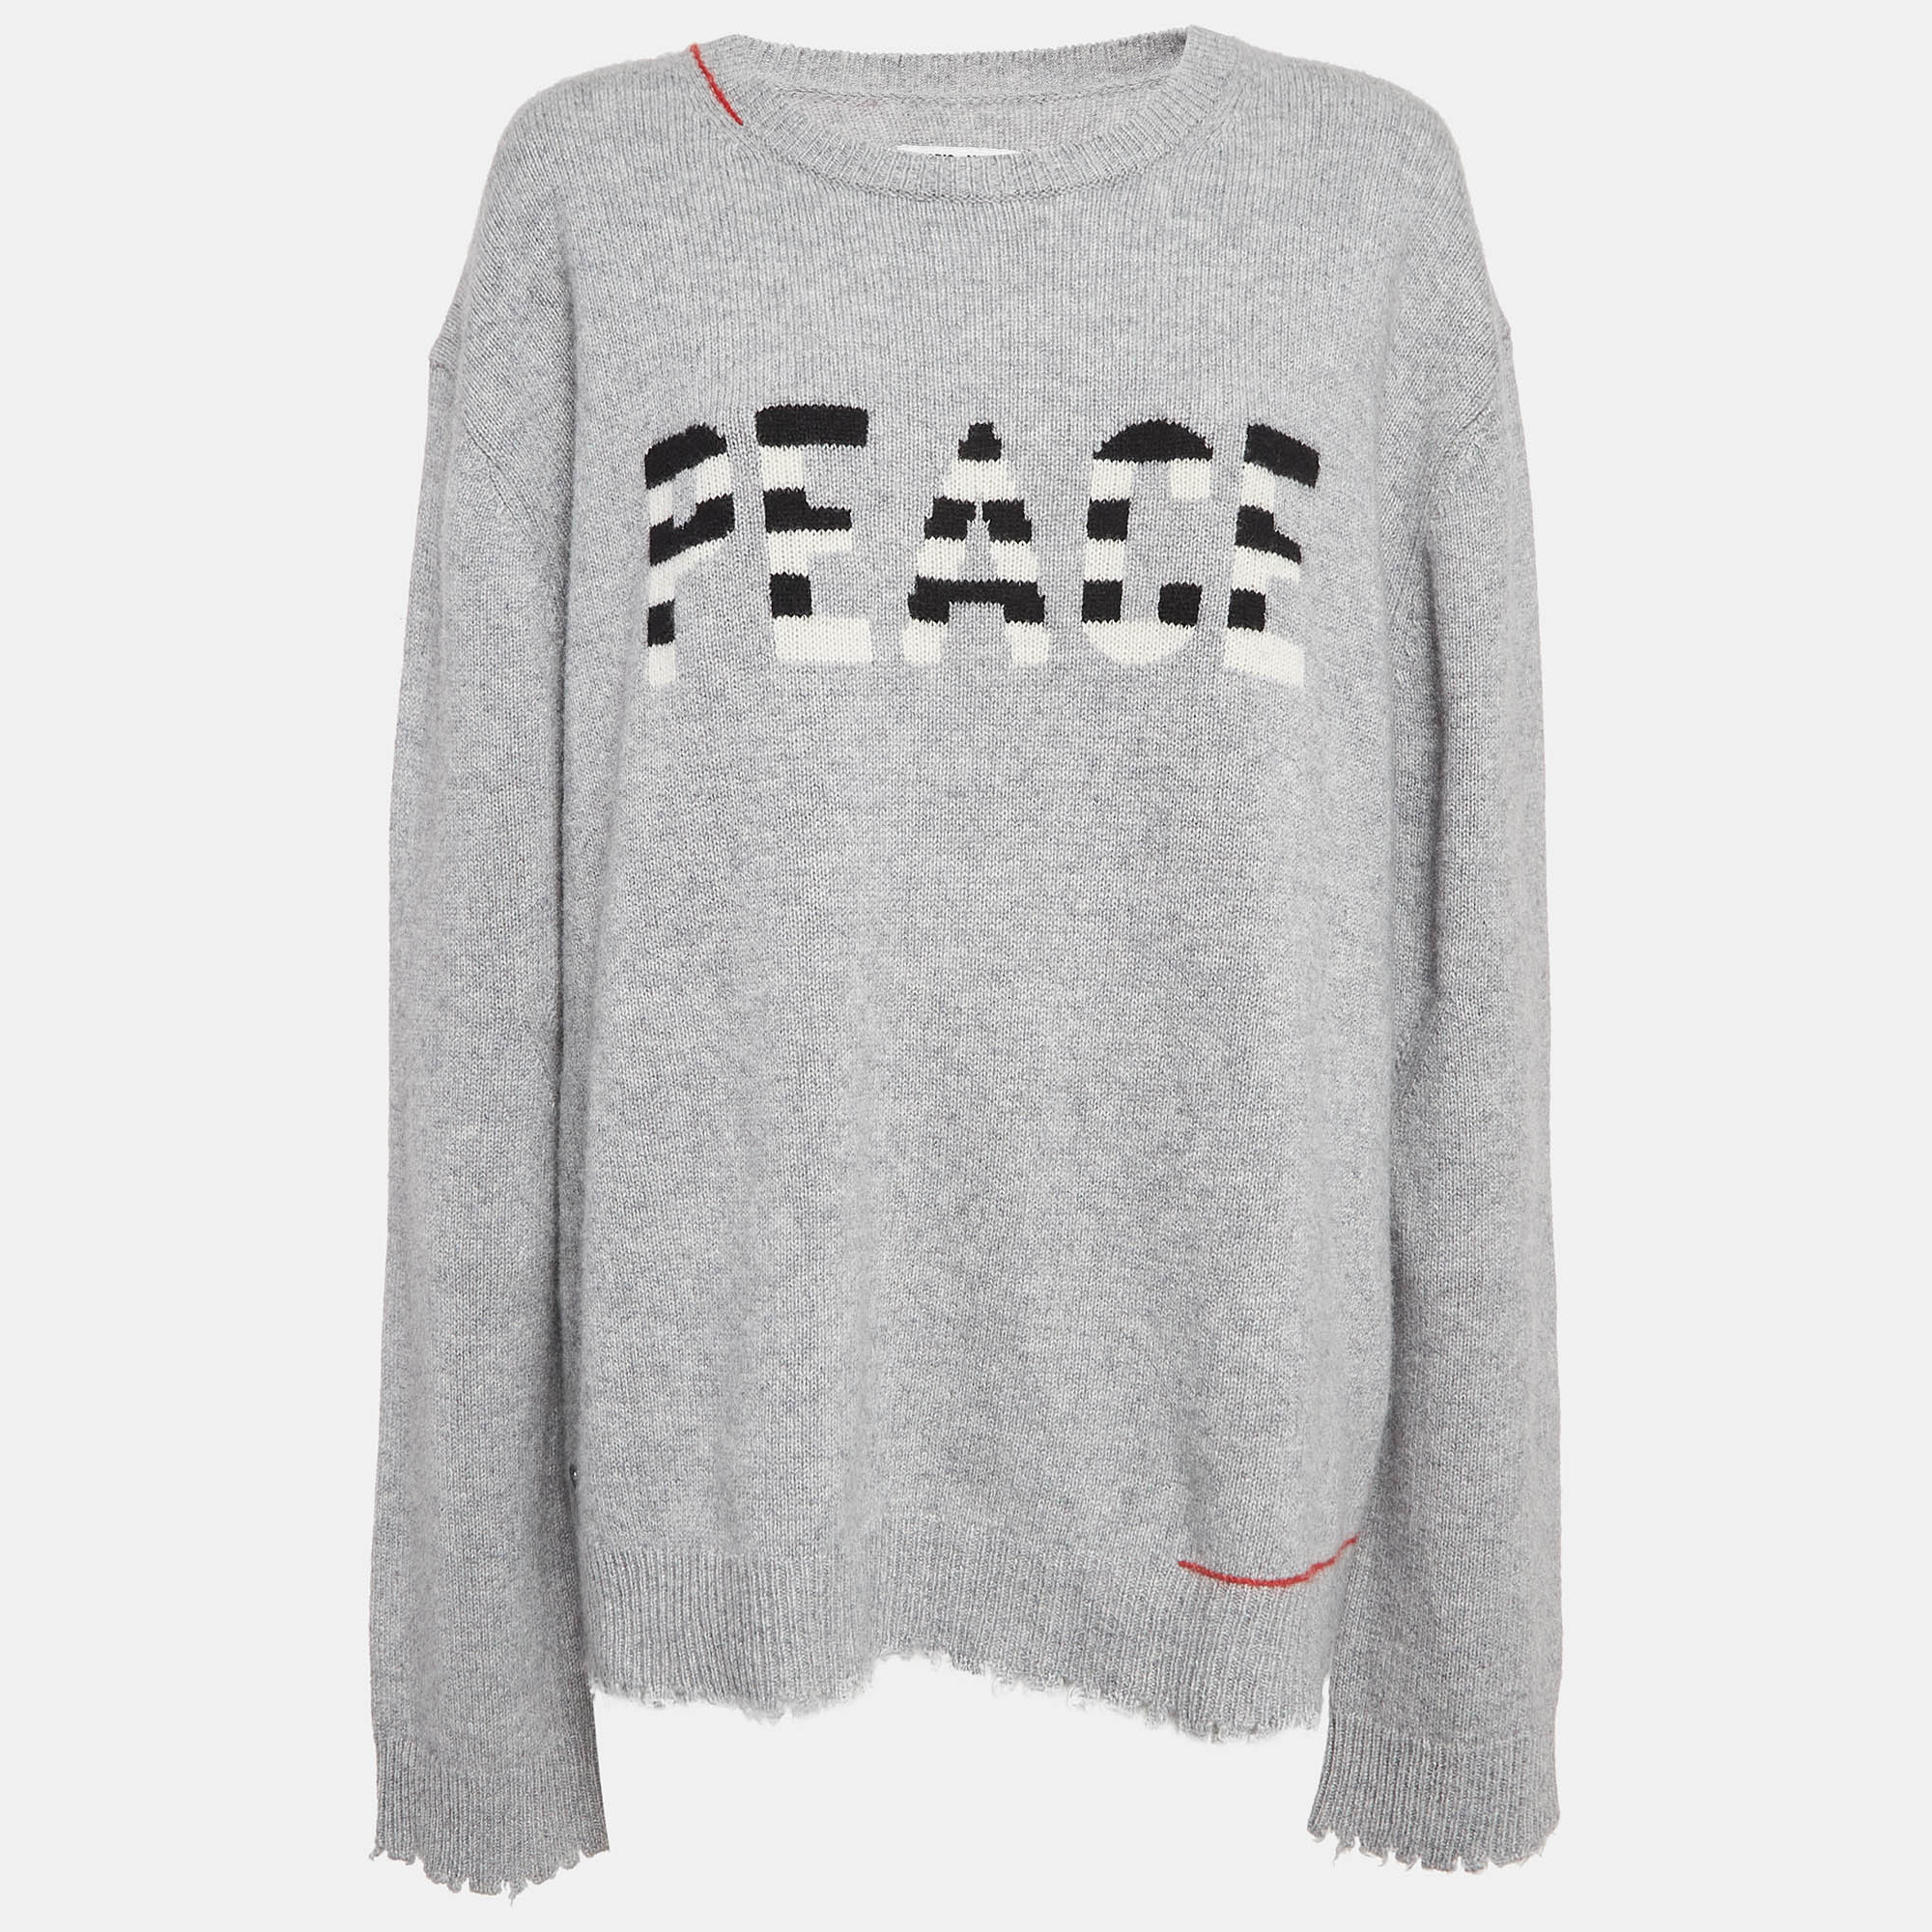 

Zadig & Voltaire Grey Cashmere Distressed Sweater